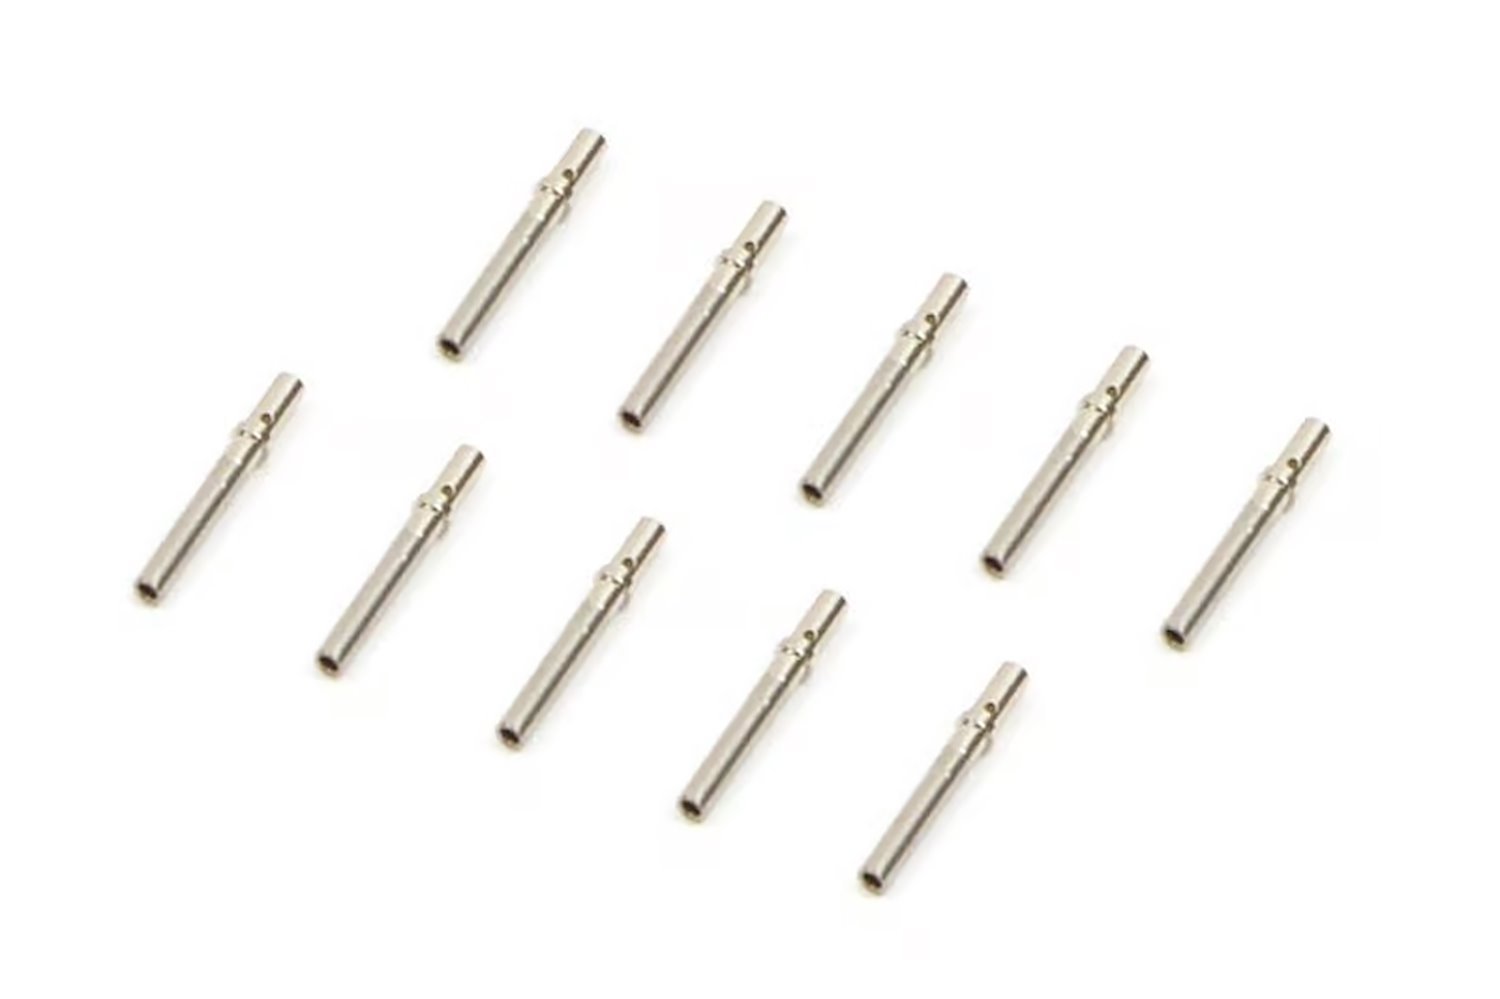 HT-031051 Pins Only, Female-Pins to Male Deutsch DTM Connectors